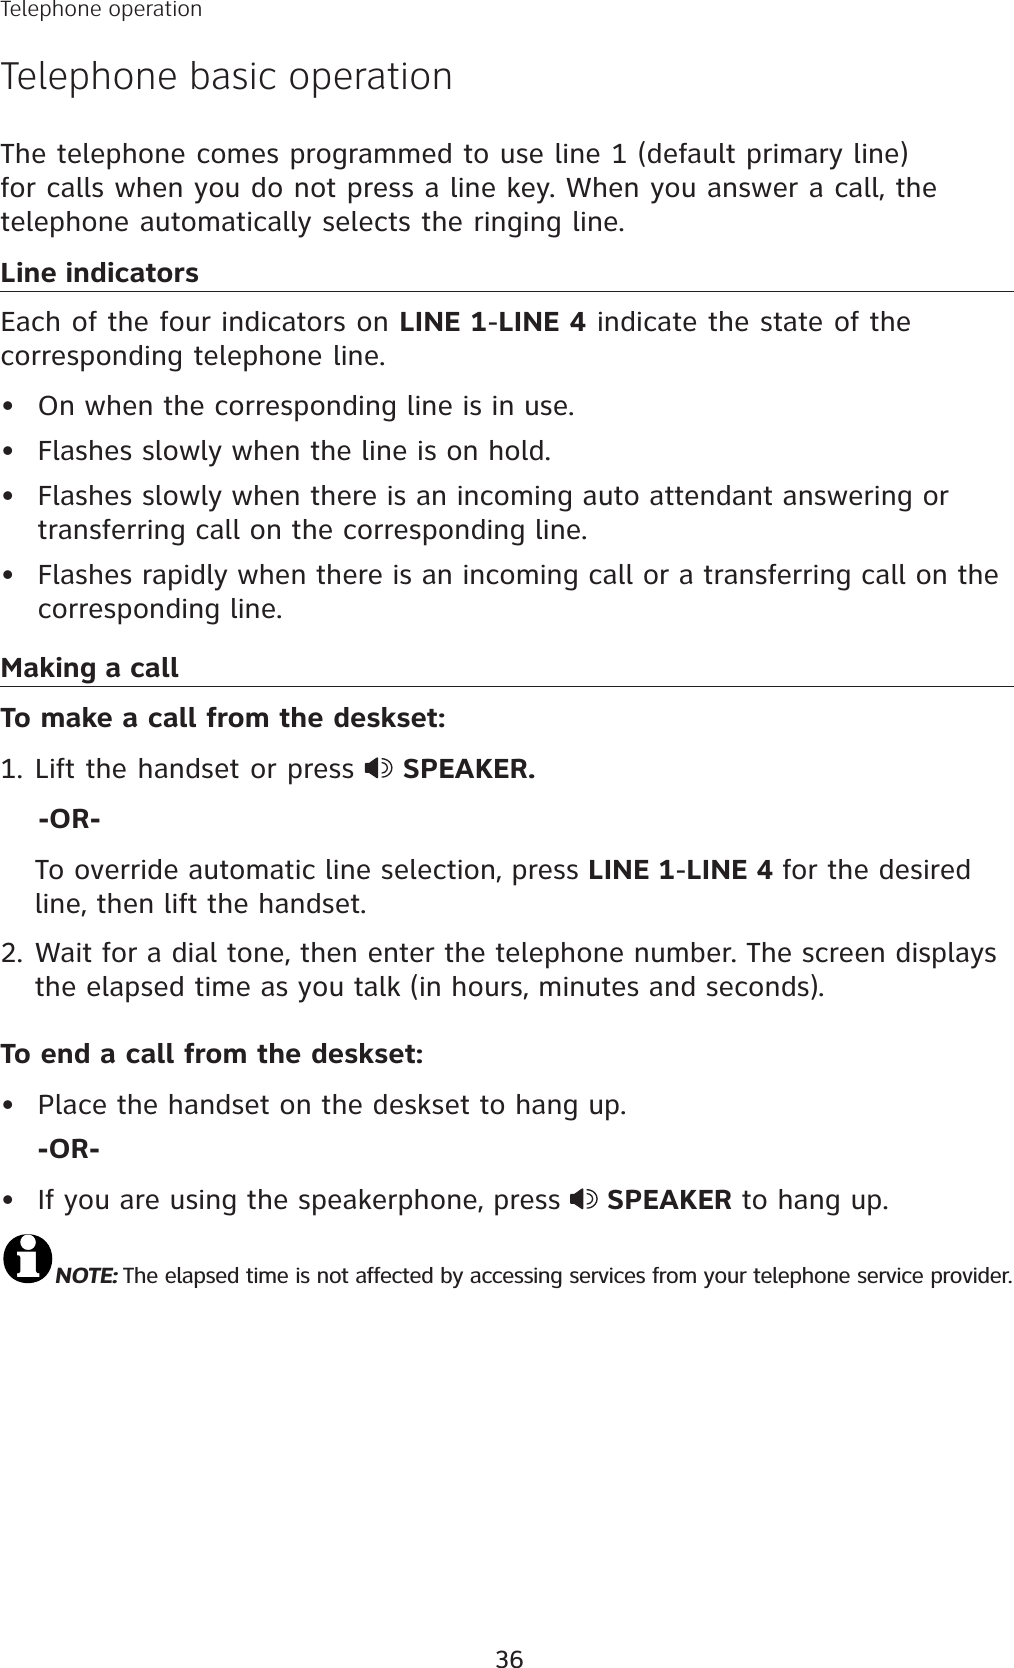 36The telephone comes programmed to use line 1 (default primary line) for calls when you do not press a line key. When you answer a call, the telephone automatically selects the ringing line. Line indicatorsEach of the four indicators on LINE 1-LINE 4 indicate the state of the corresponding telephone line. On when the corresponding line is in use.Flashes slowly when the line is on hold.Flashes slowly when there is an incoming auto attendant answering or transferring call on the corresponding line. Flashes rapidly when there is an incoming call or a transferring call on the corresponding line.Making a callTo make a call from the deskset:Lift the handset or press  SPEAKER.    -OR-To override automatic line selection, press LINE 1-LINE 4 for the desired line, then lift the handset. 2. Wait for a dial tone, then enter the telephone number. The screen displays the elapsed time as you talk (in hours, minutes and seconds). To end a call from the deskset:Place the handset on the deskset to hang up.-OR-If you are using the speakerphone, press  SPEAKER to hang up.NOTE: The elapsed time is not affected by accessing services from your telephone service provider.••••1.••Telephone operationTelephone basic operation